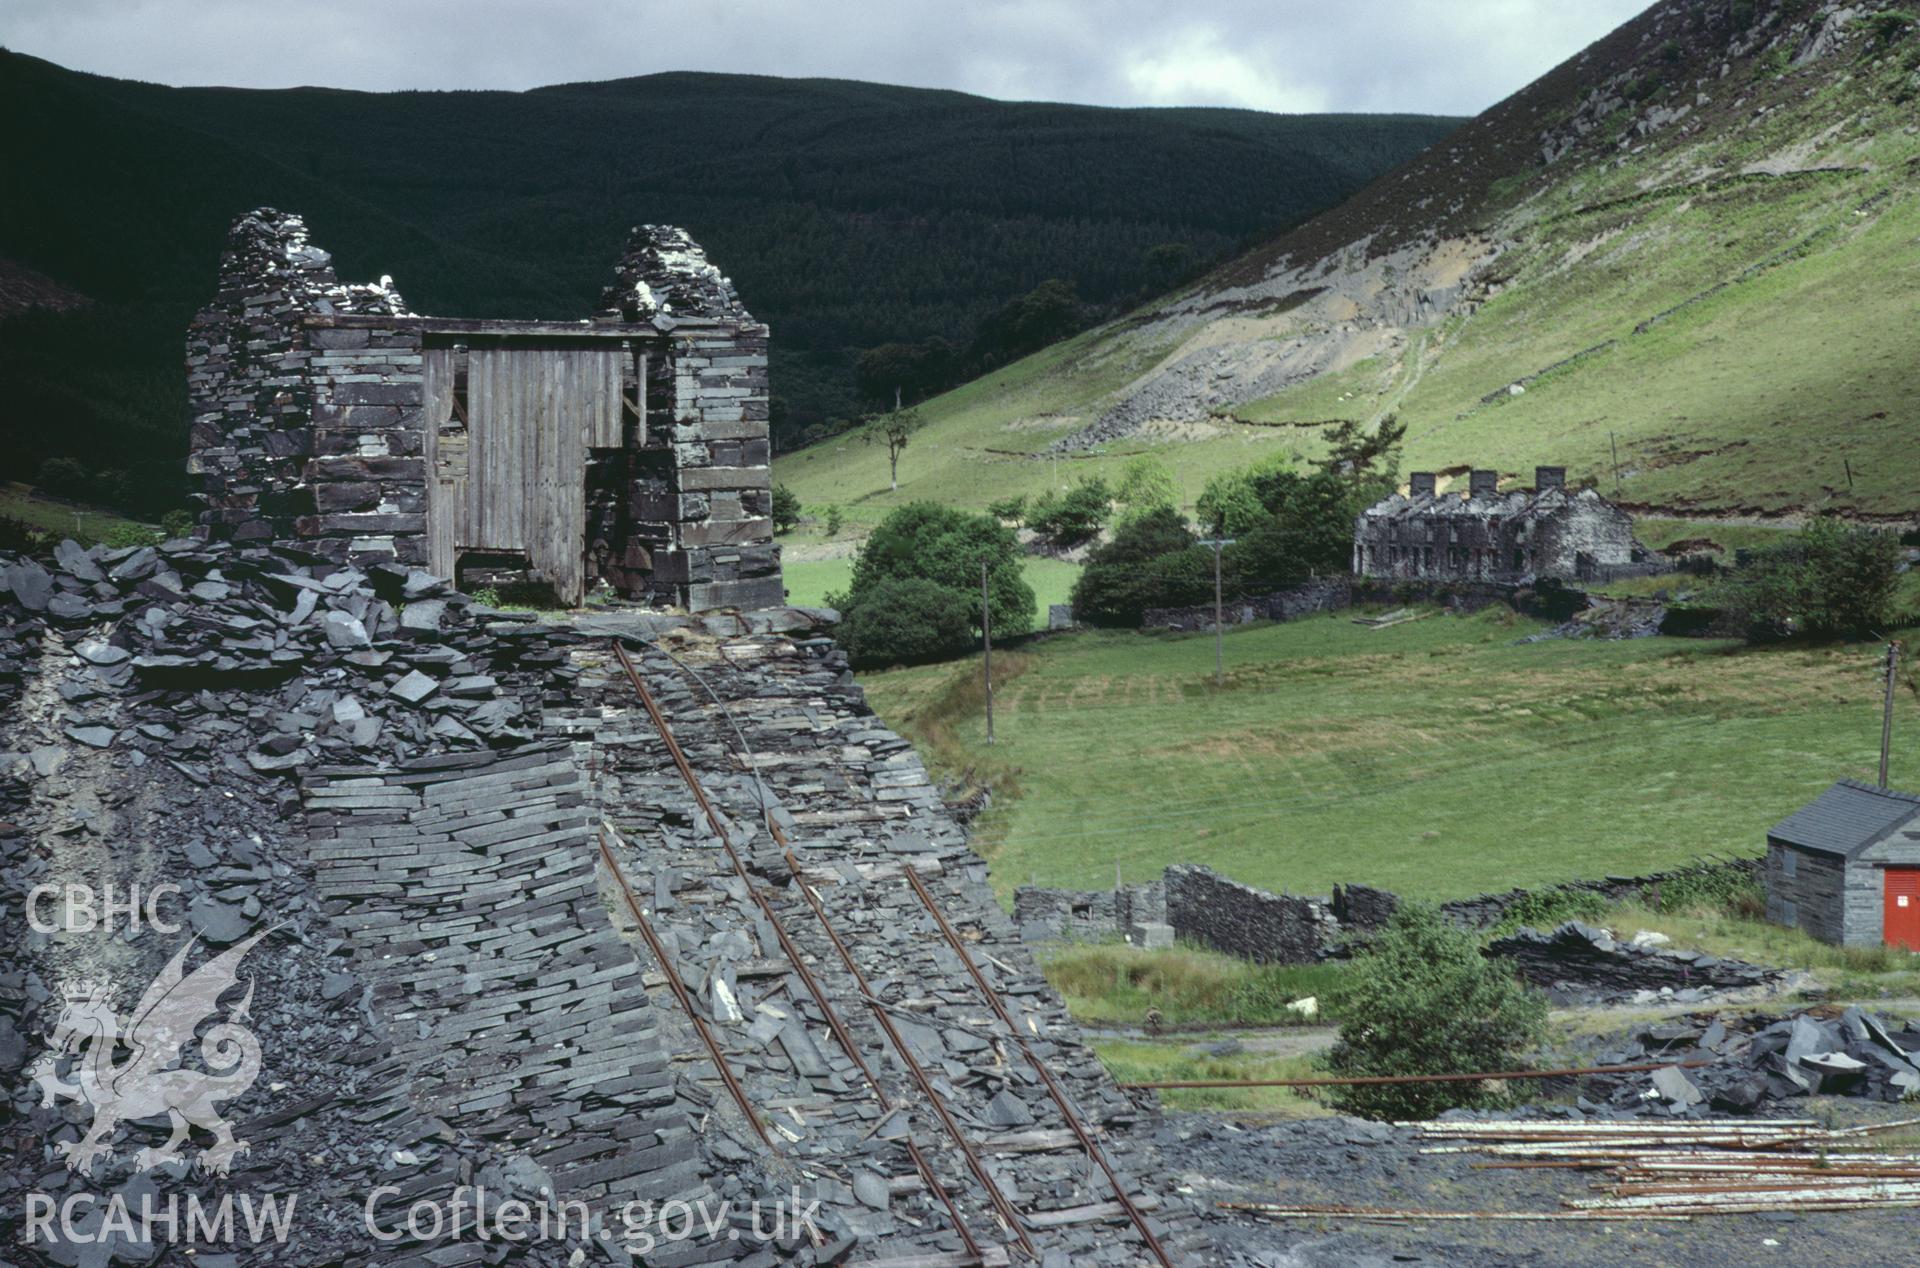 35mm colour slide of Aberllefefni Slate Quarry, Merionethshire by Dylan Roberts.